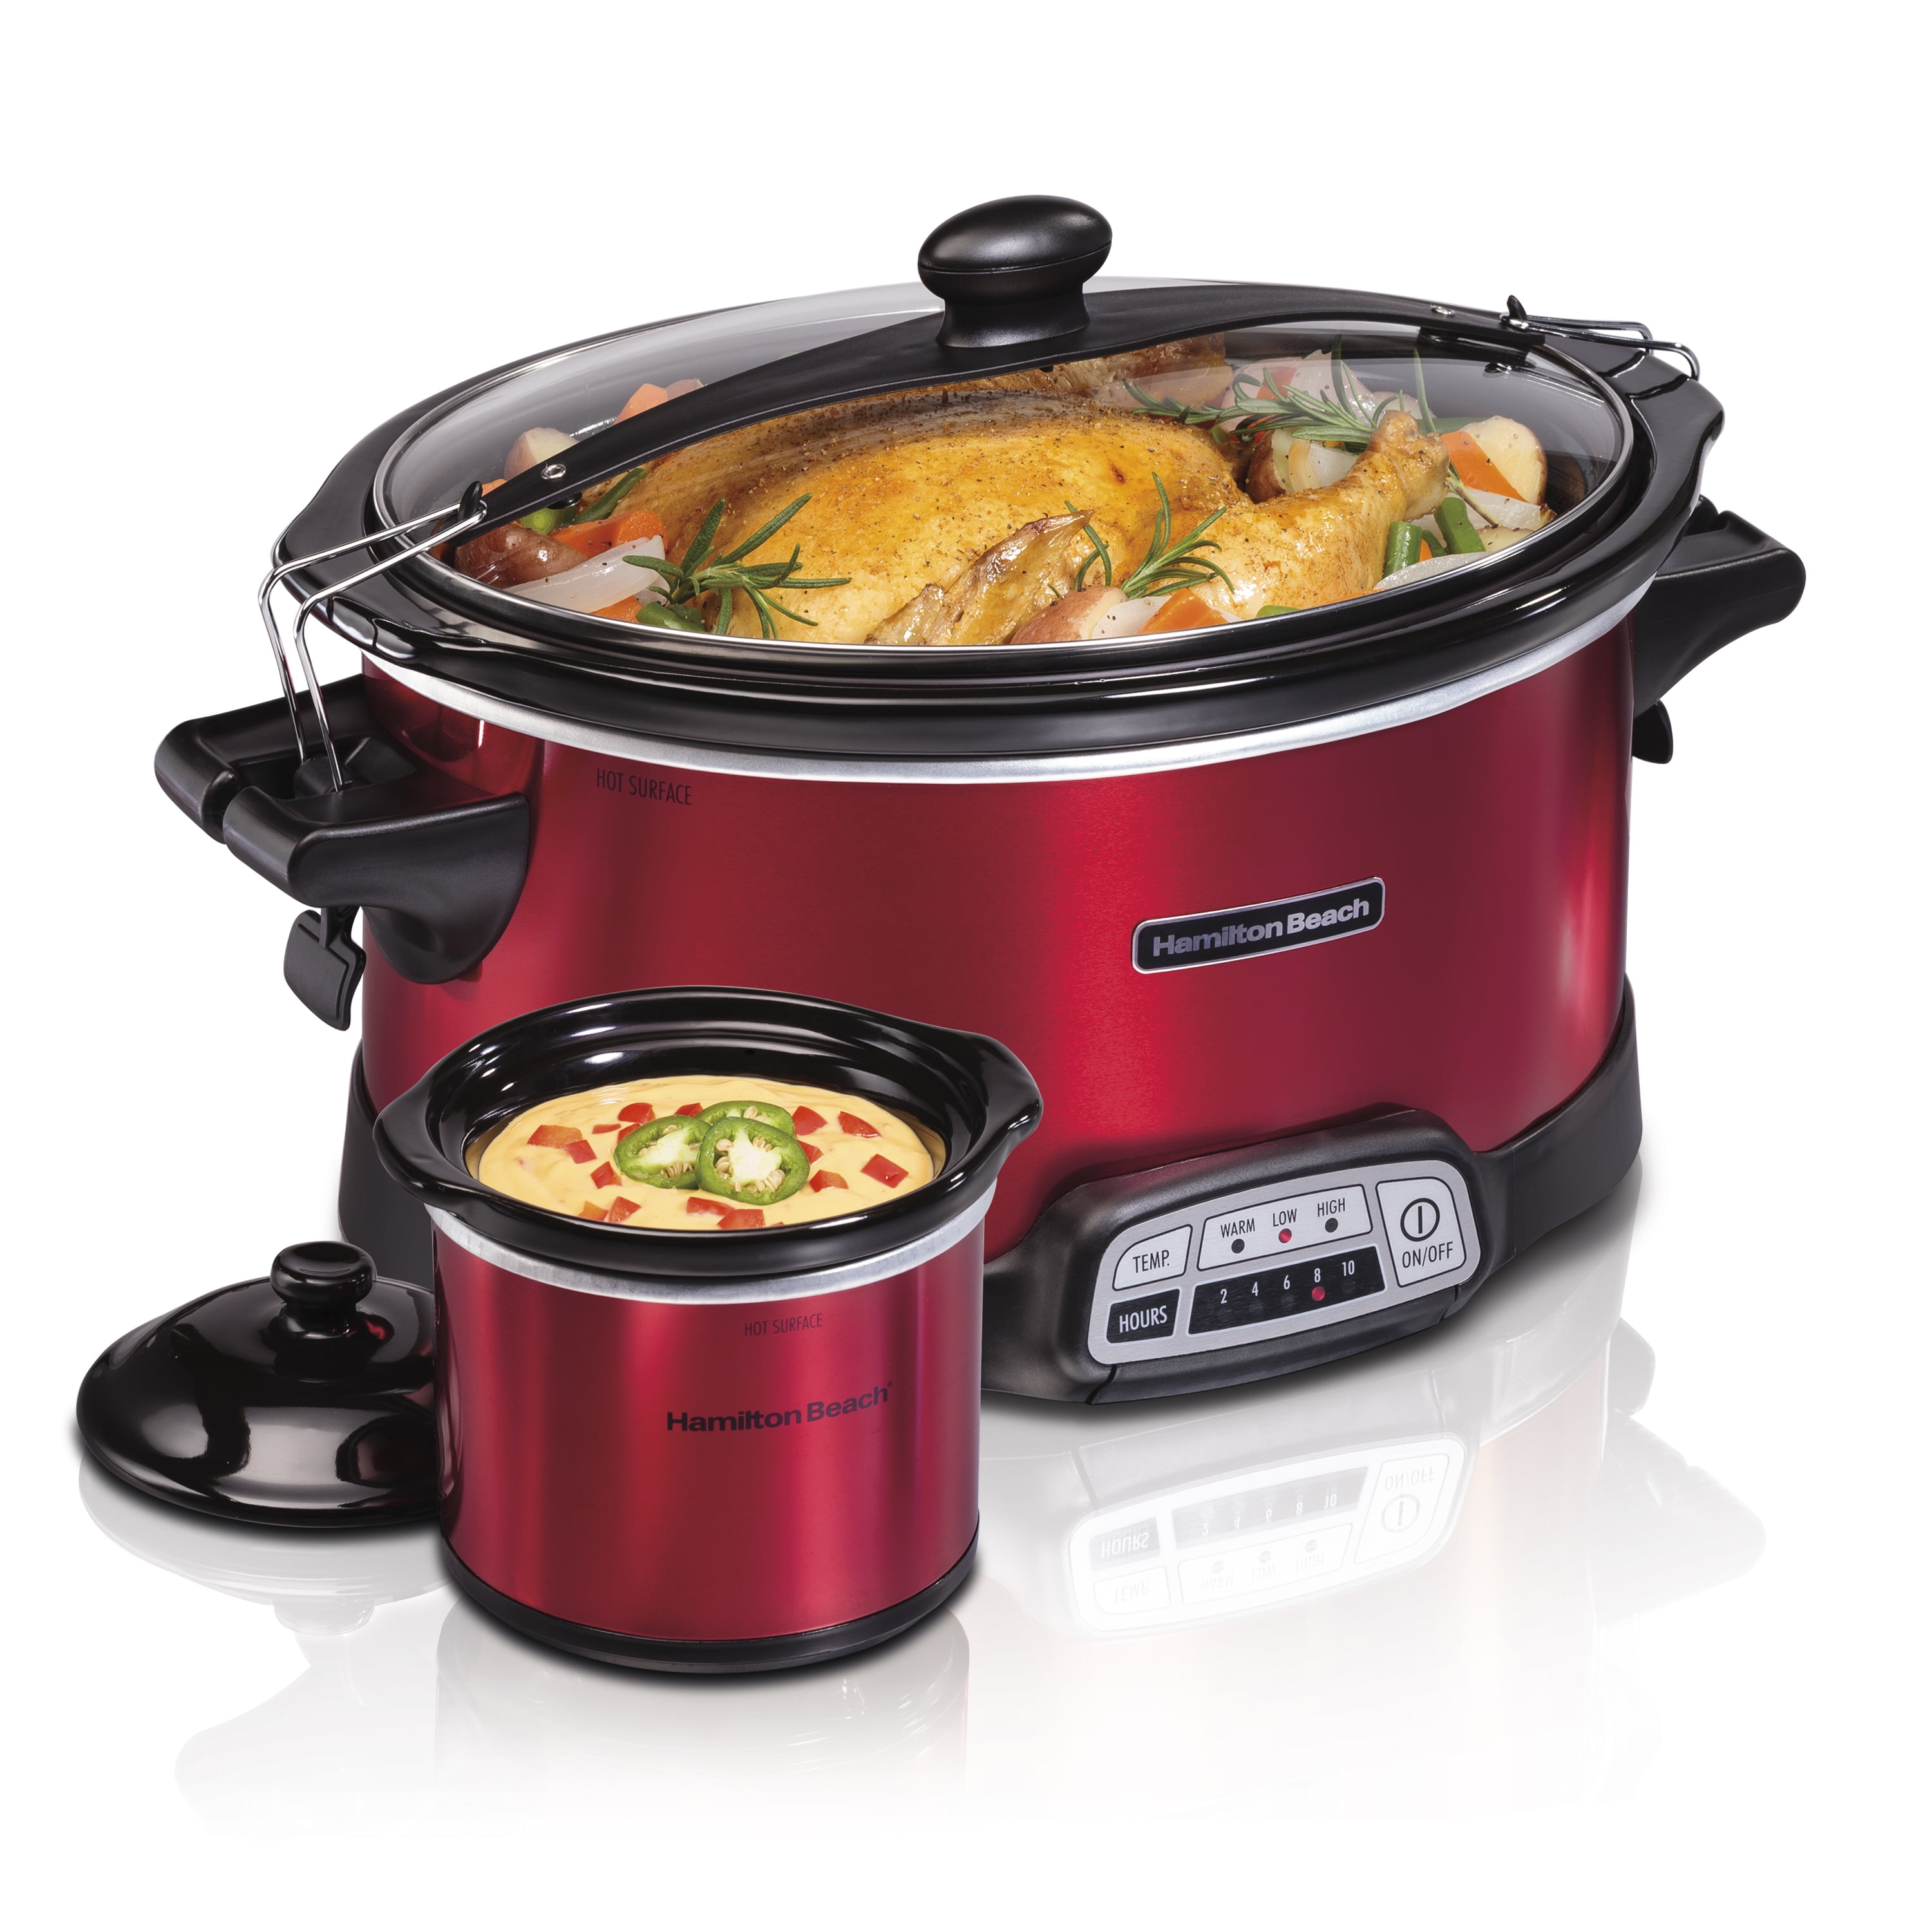 Crock-Pot 6-Quart Cook & Carry Manual Slow Cooker with Little Dipper Warmer Red 